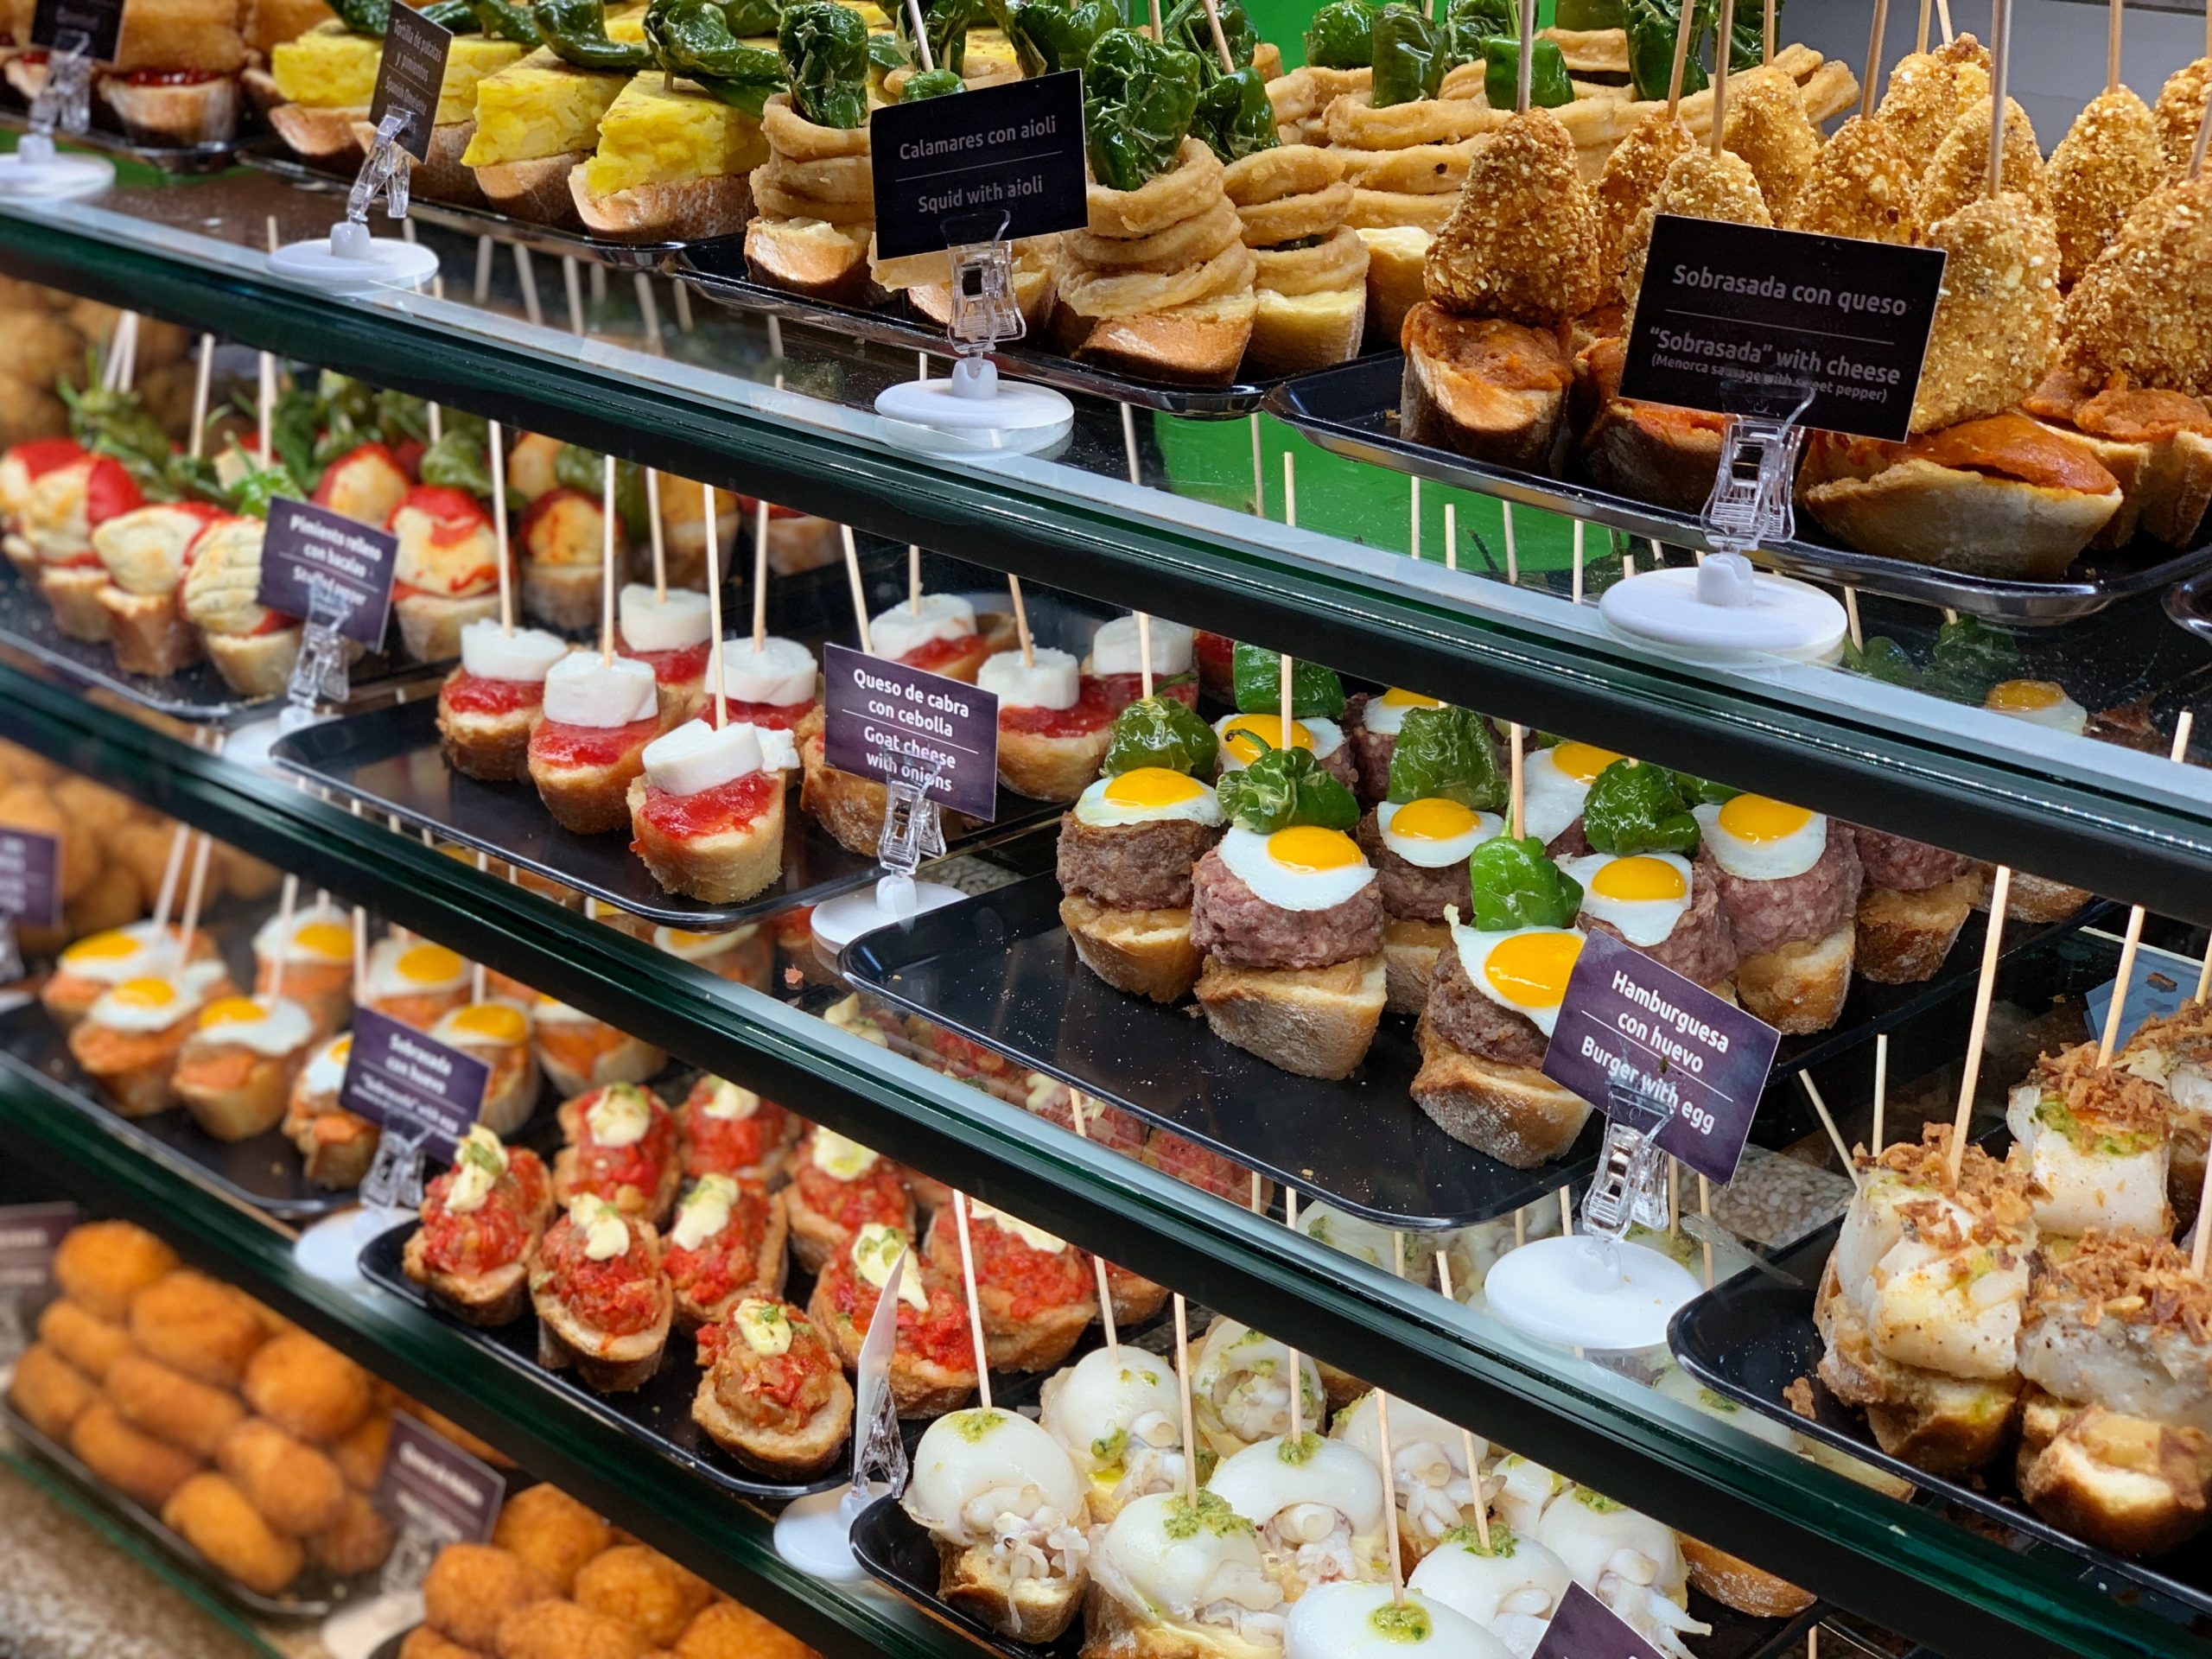 move to Spain for the food - lot's of different pinchos in a display cabinet